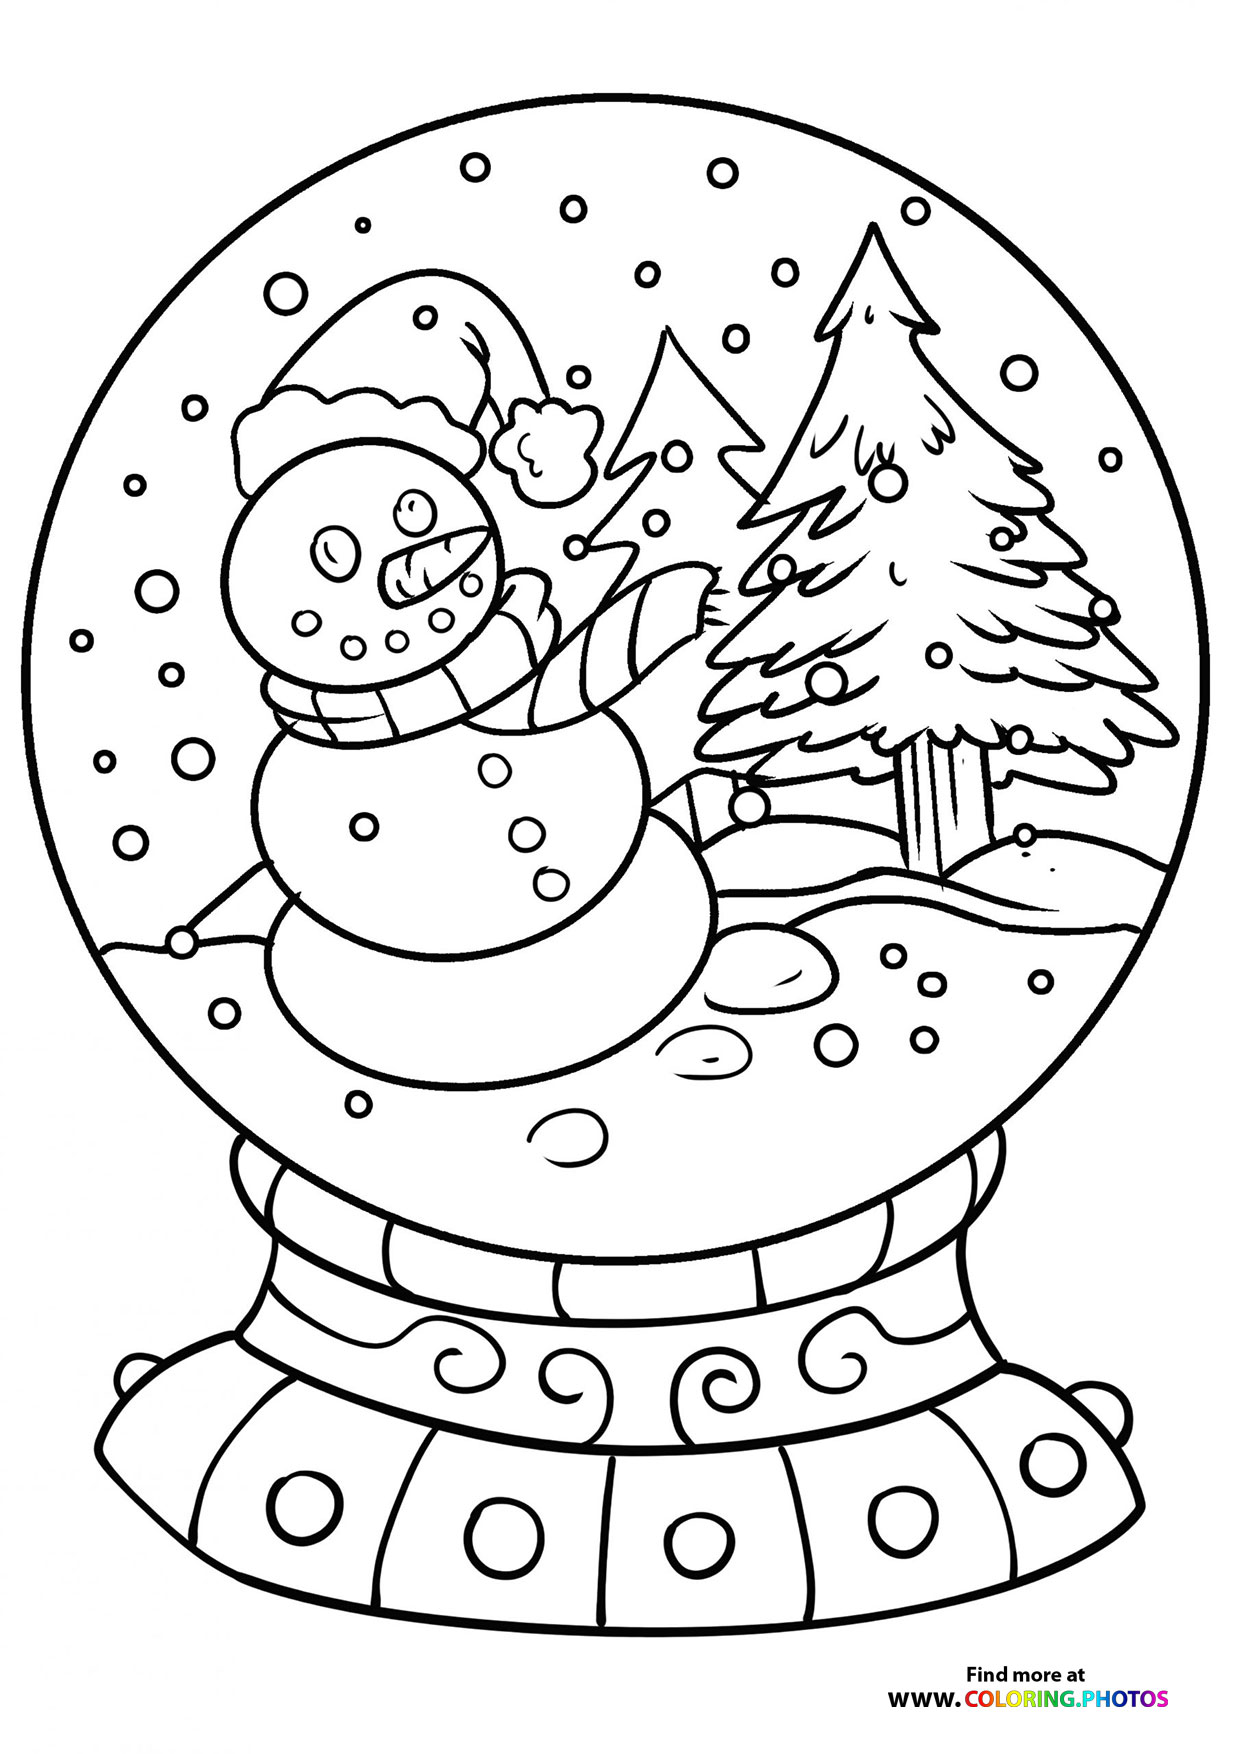 snowman-in-snow-globe-coloring-pages-for-kids